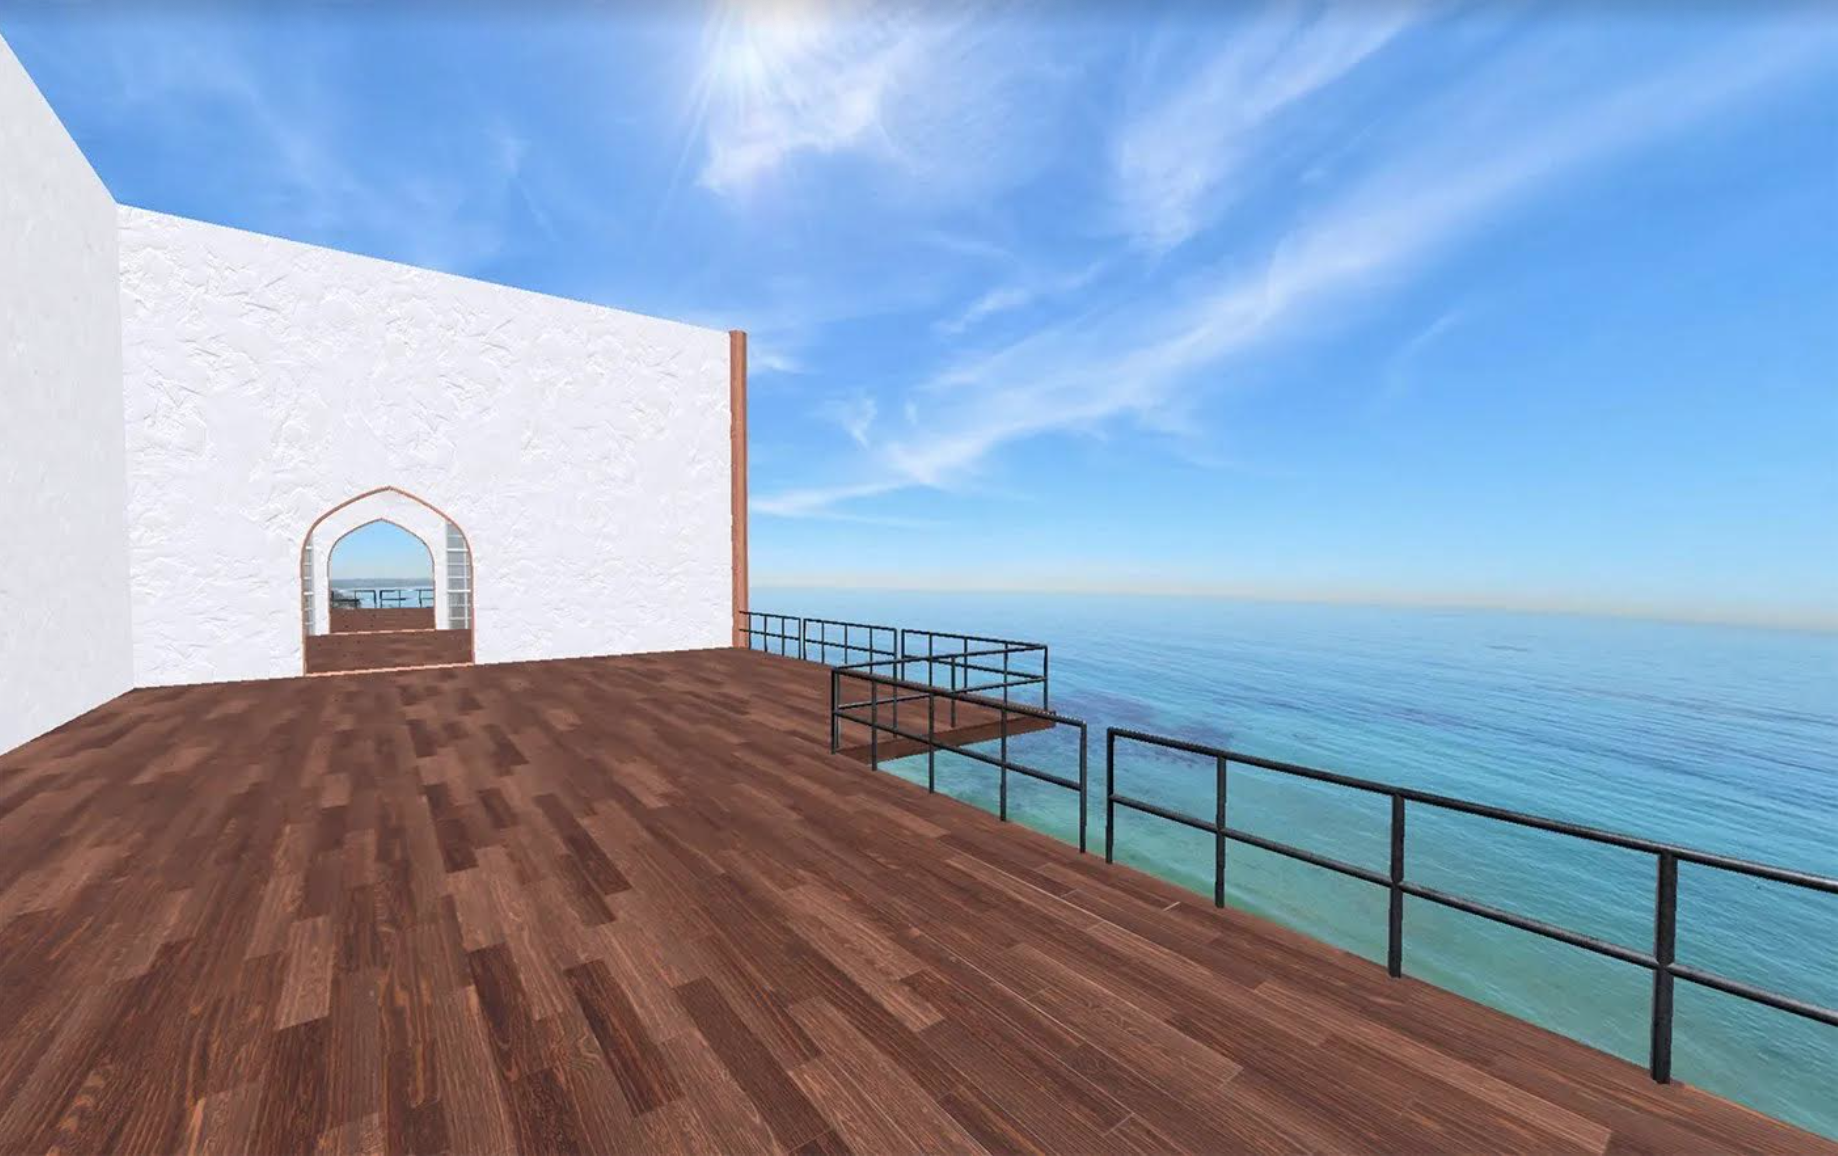 Lifelike computer image of white building walls on a deck overlooking water